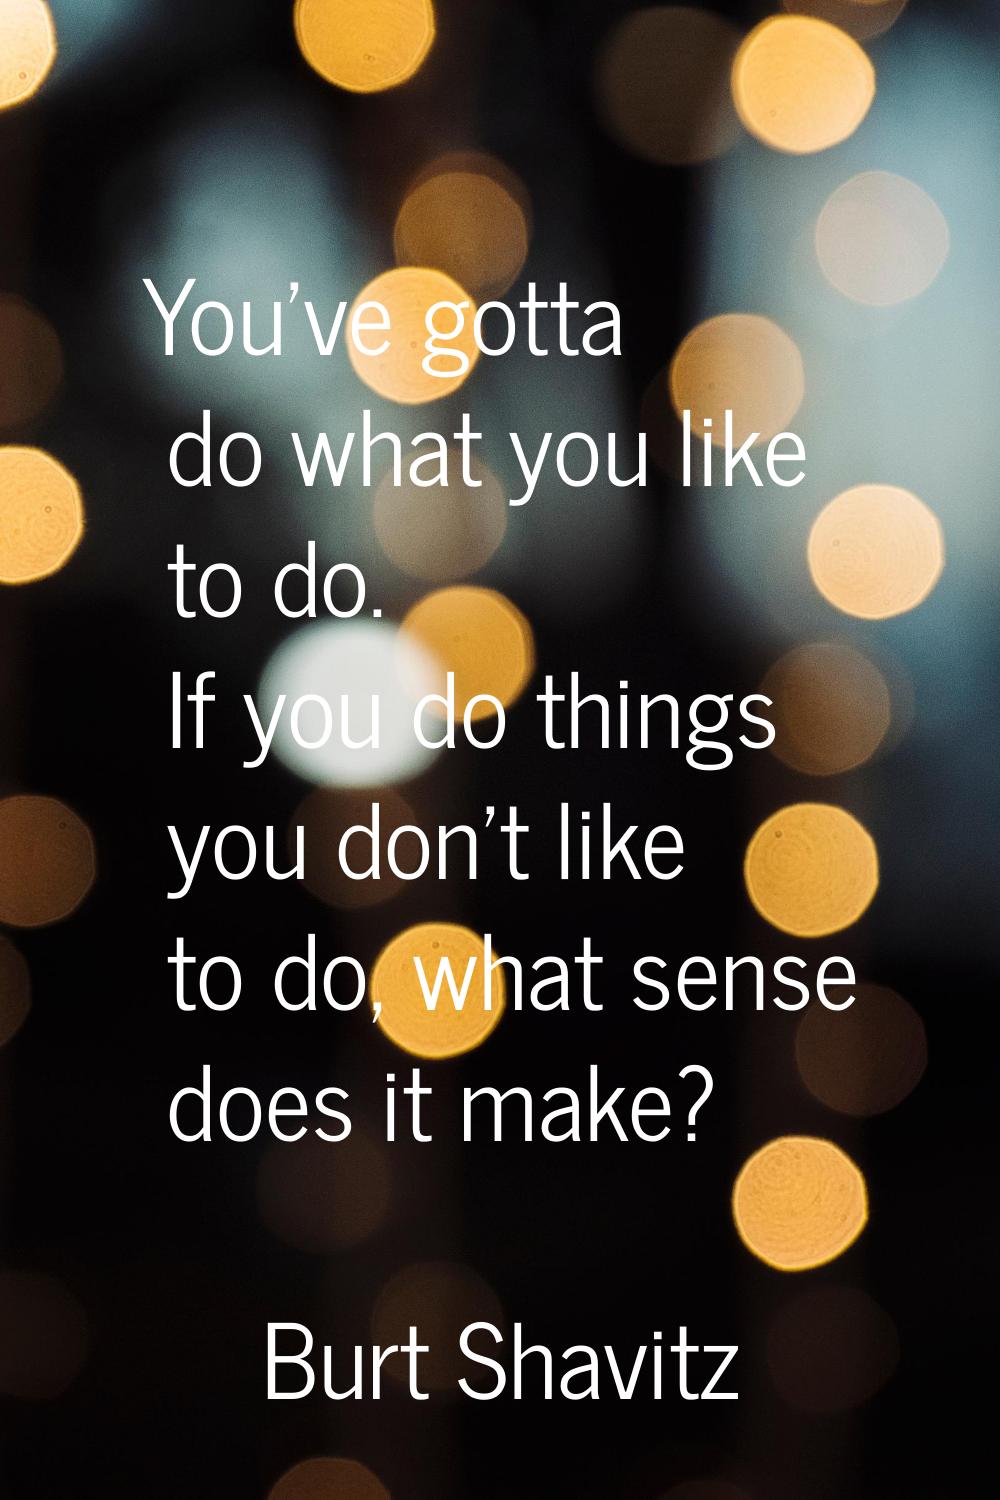 You've gotta do what you like to do. If you do things you don't like to do, what sense does it make